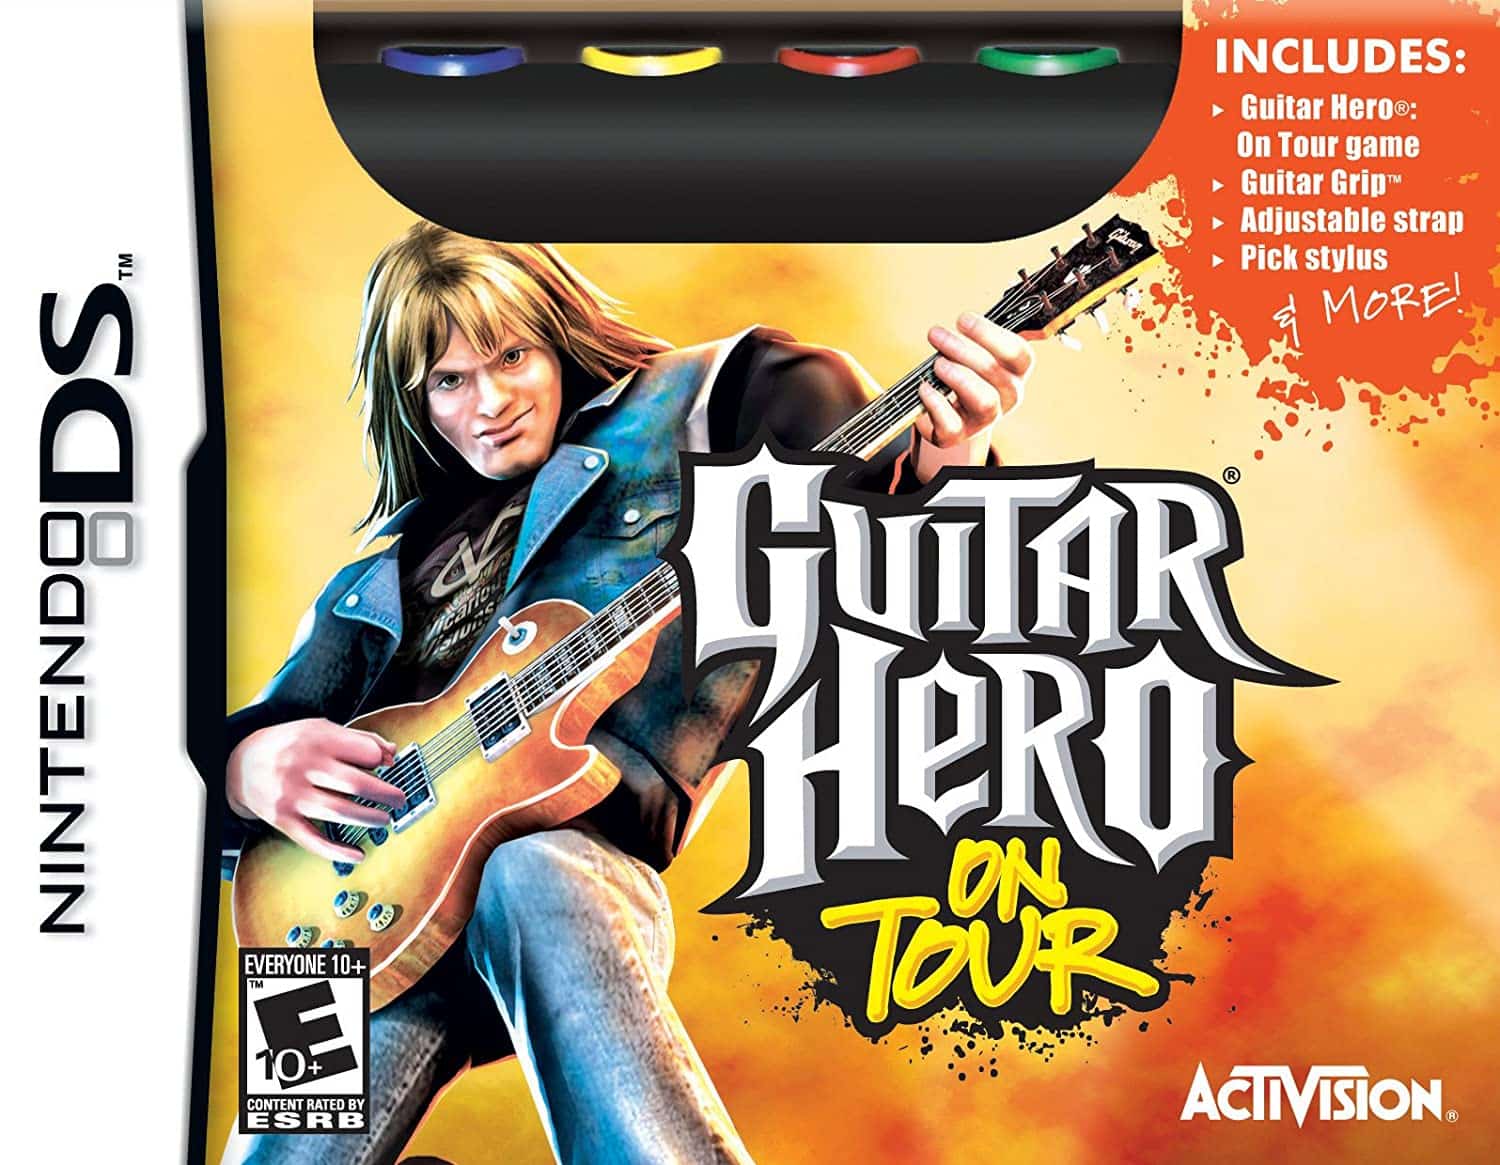 Guitar Hero: On Tour player count stats